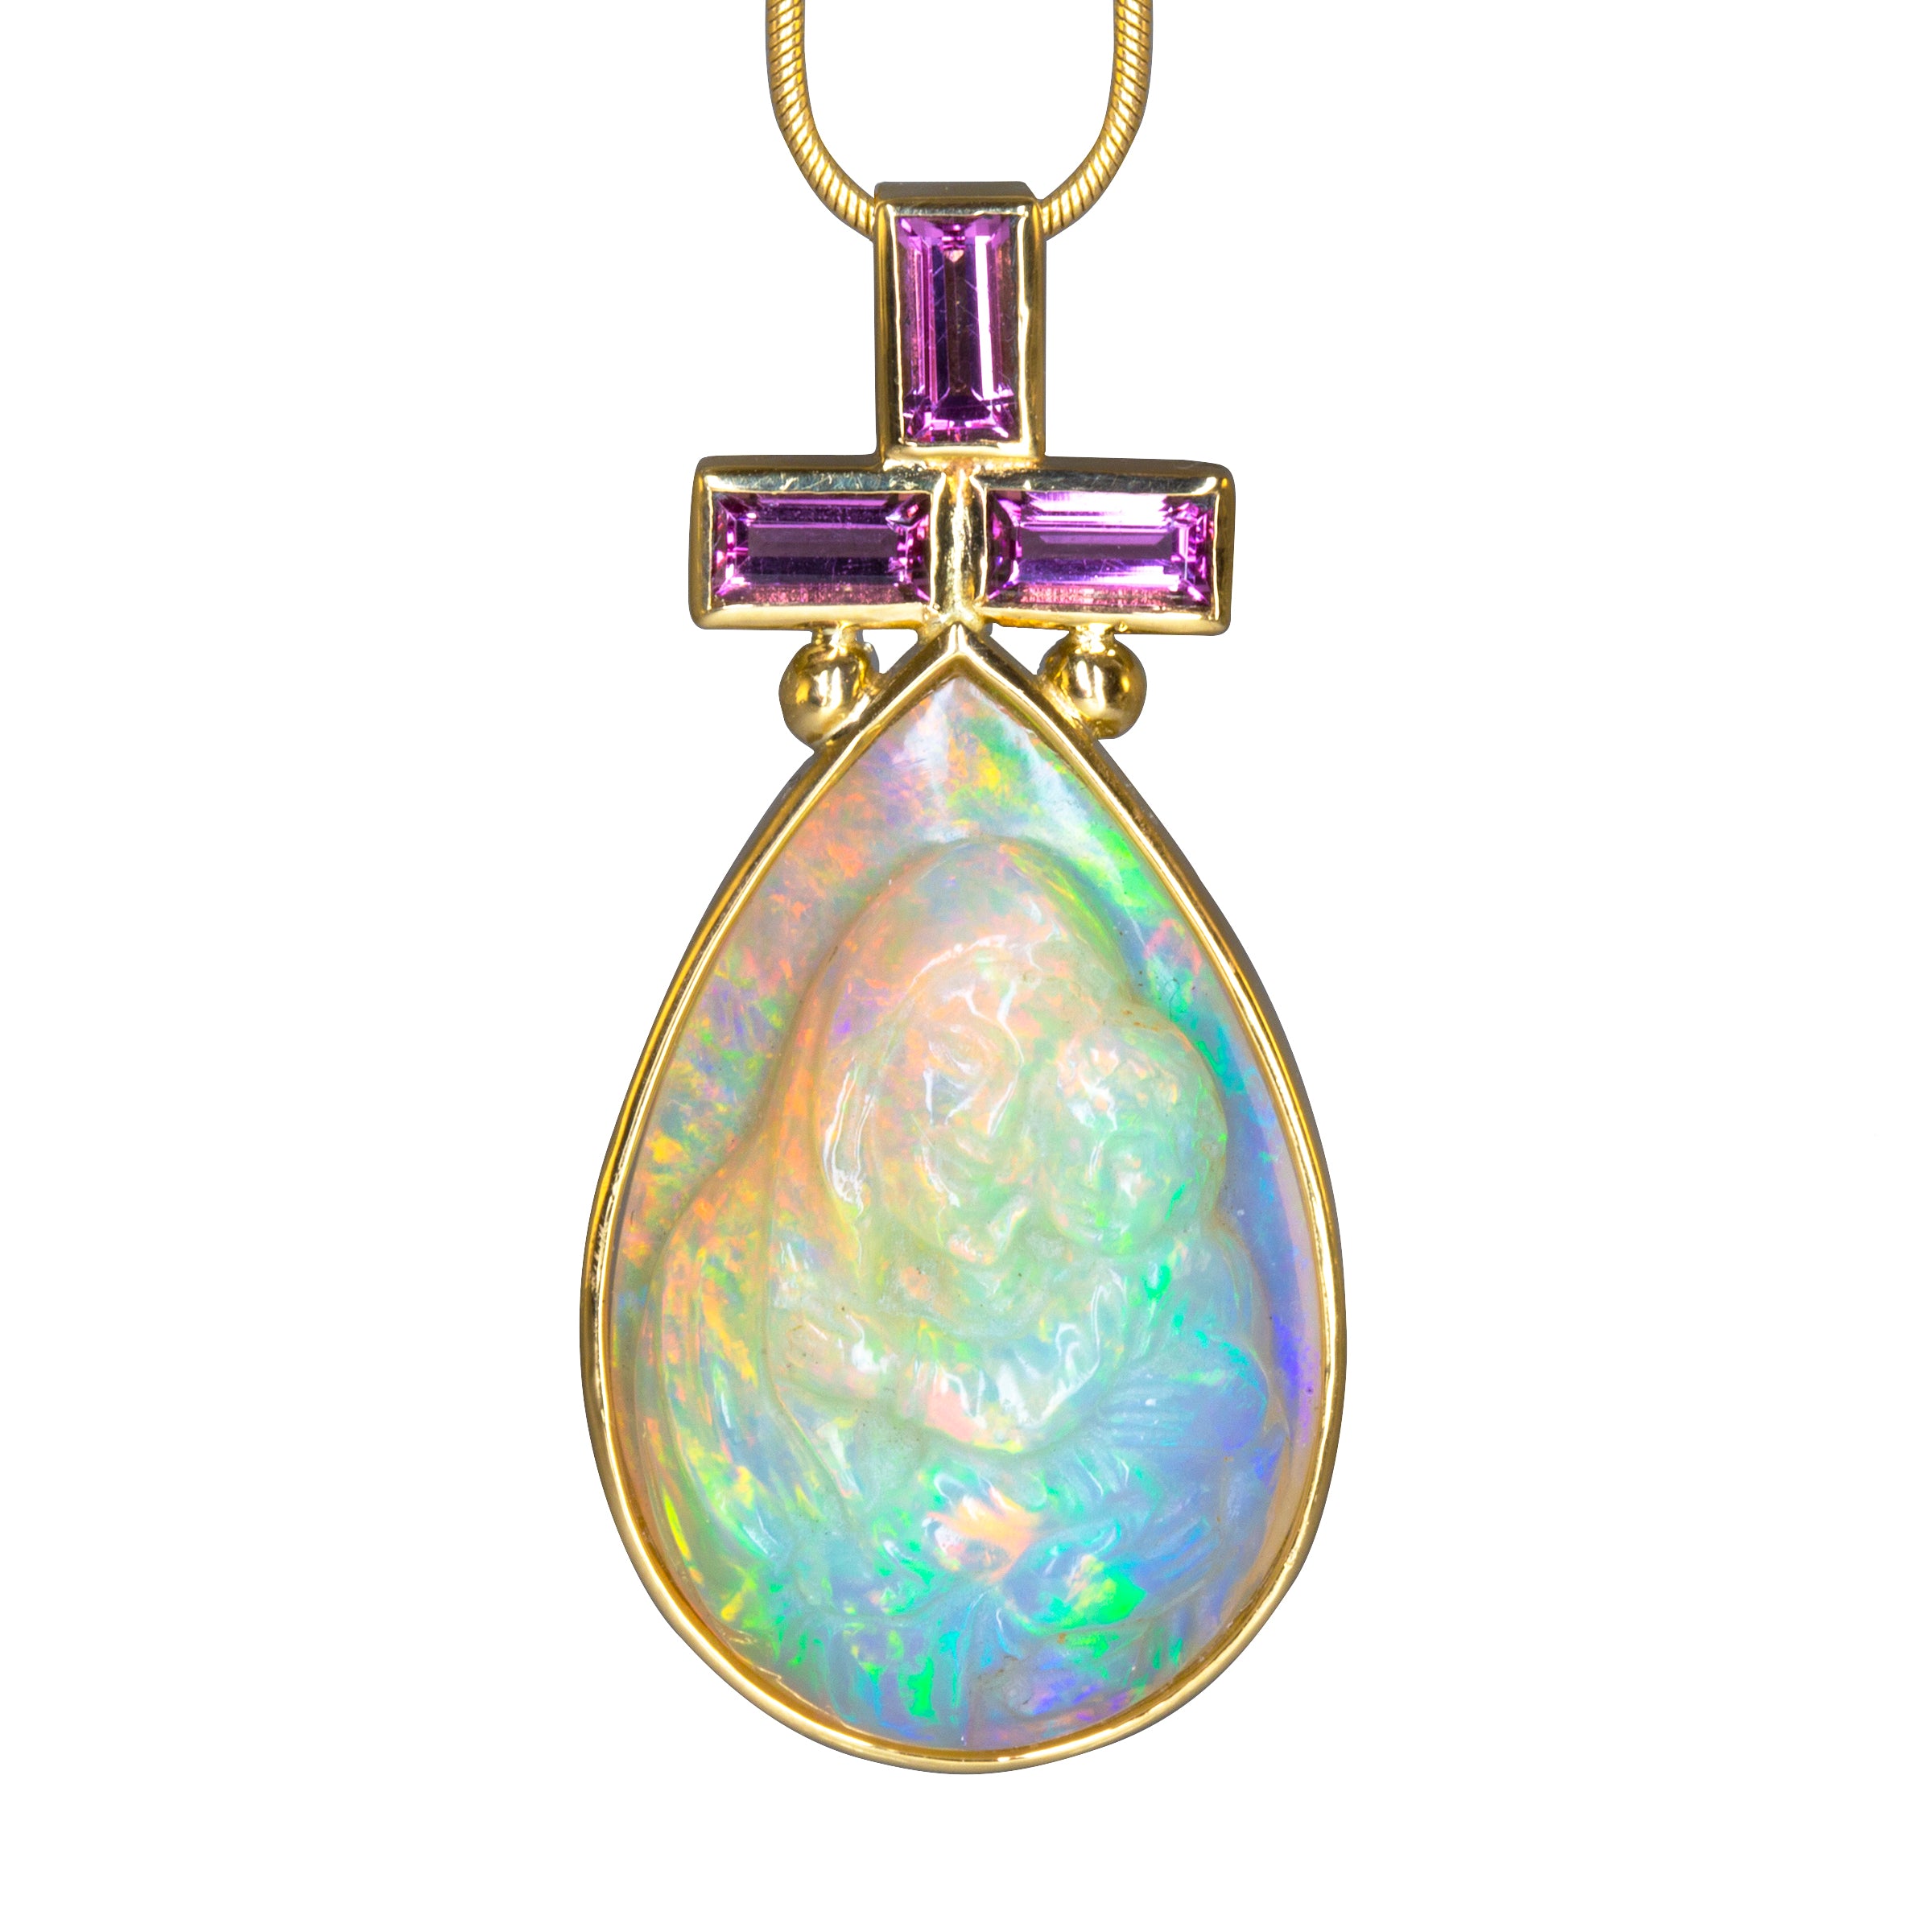 October Birthstone: Opal and Pink Tourmaline